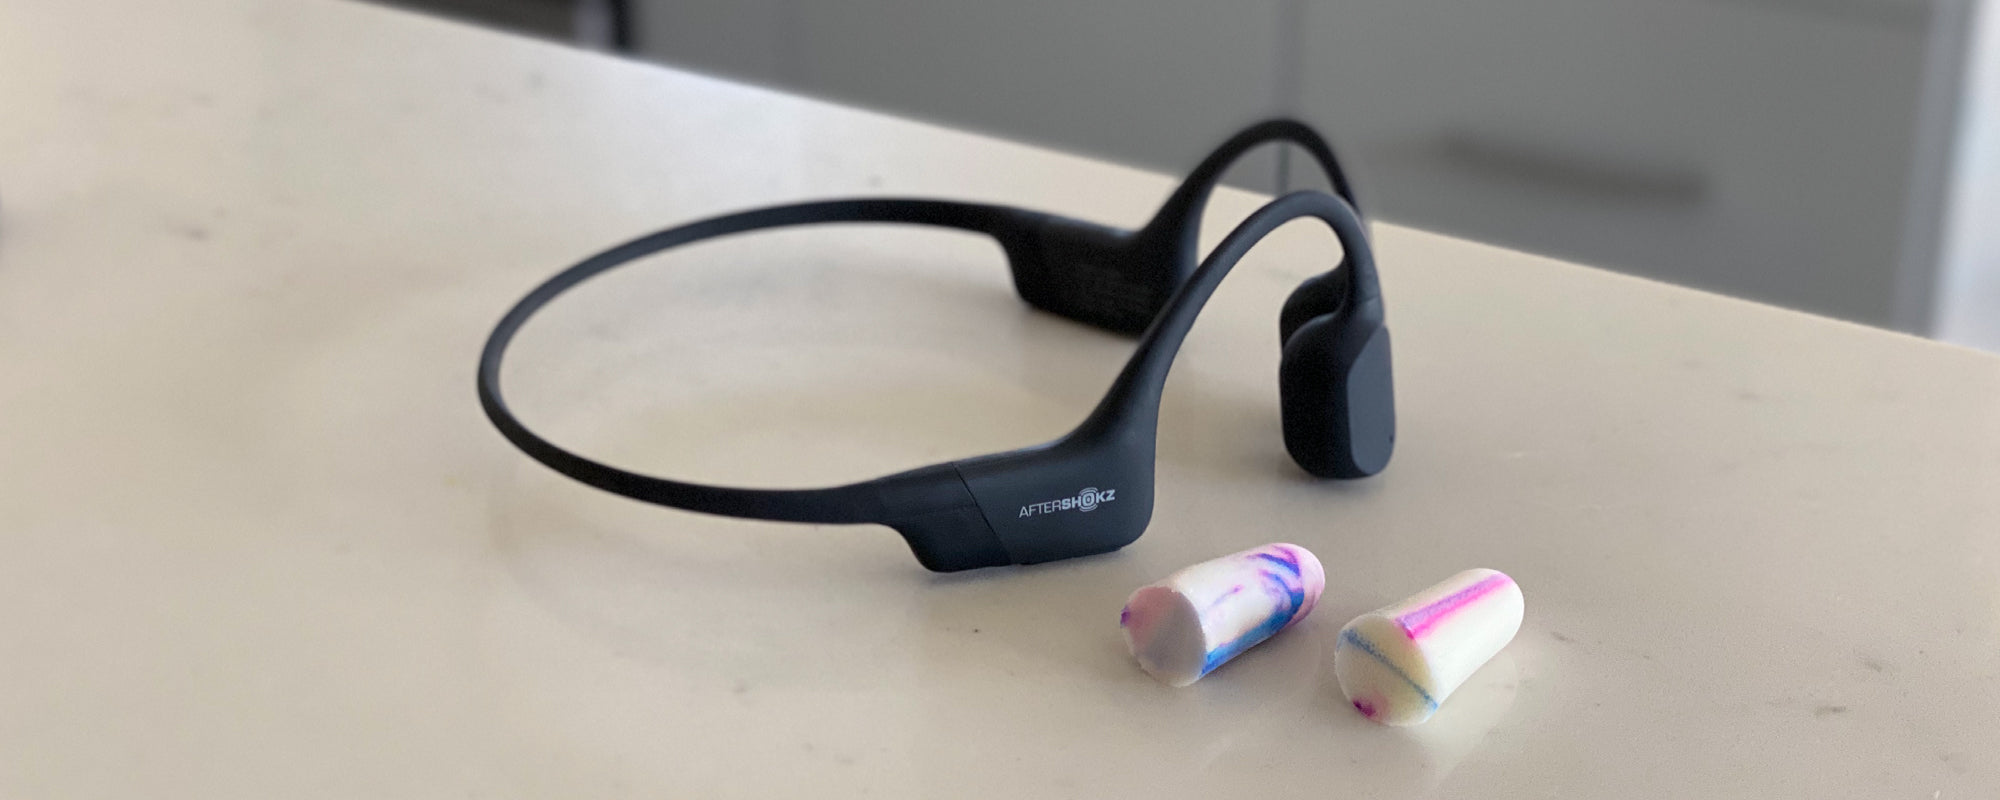 When to Use Your AfterShokz Earplugs